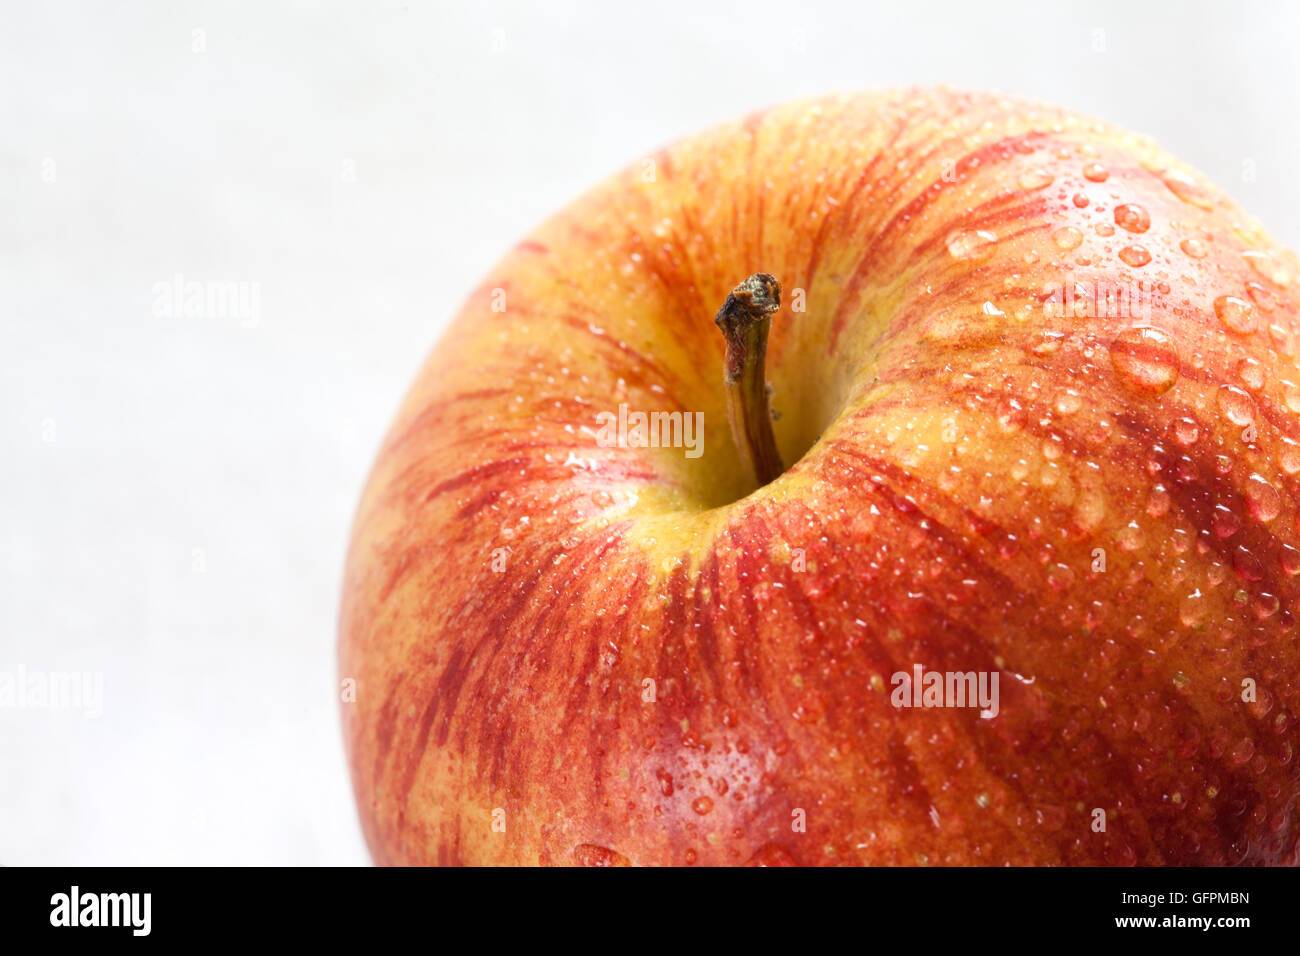 Fresh red wet apple (Malus domestica) on whithe background Stock Photo